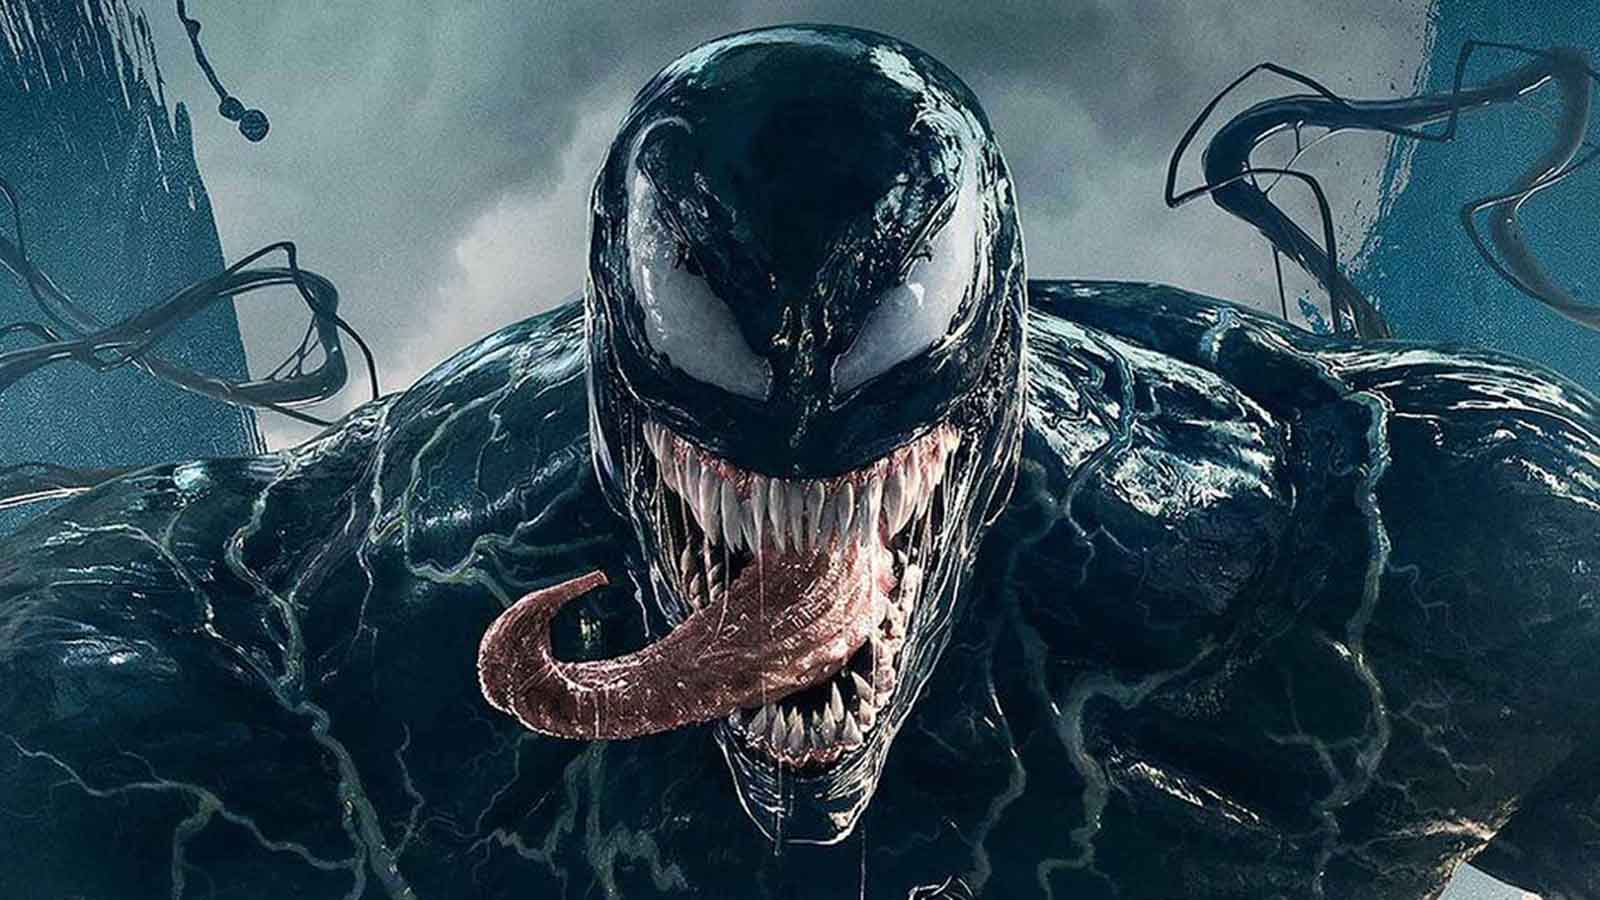 Venom 2 'Let There Be Carnage' Watch Online.